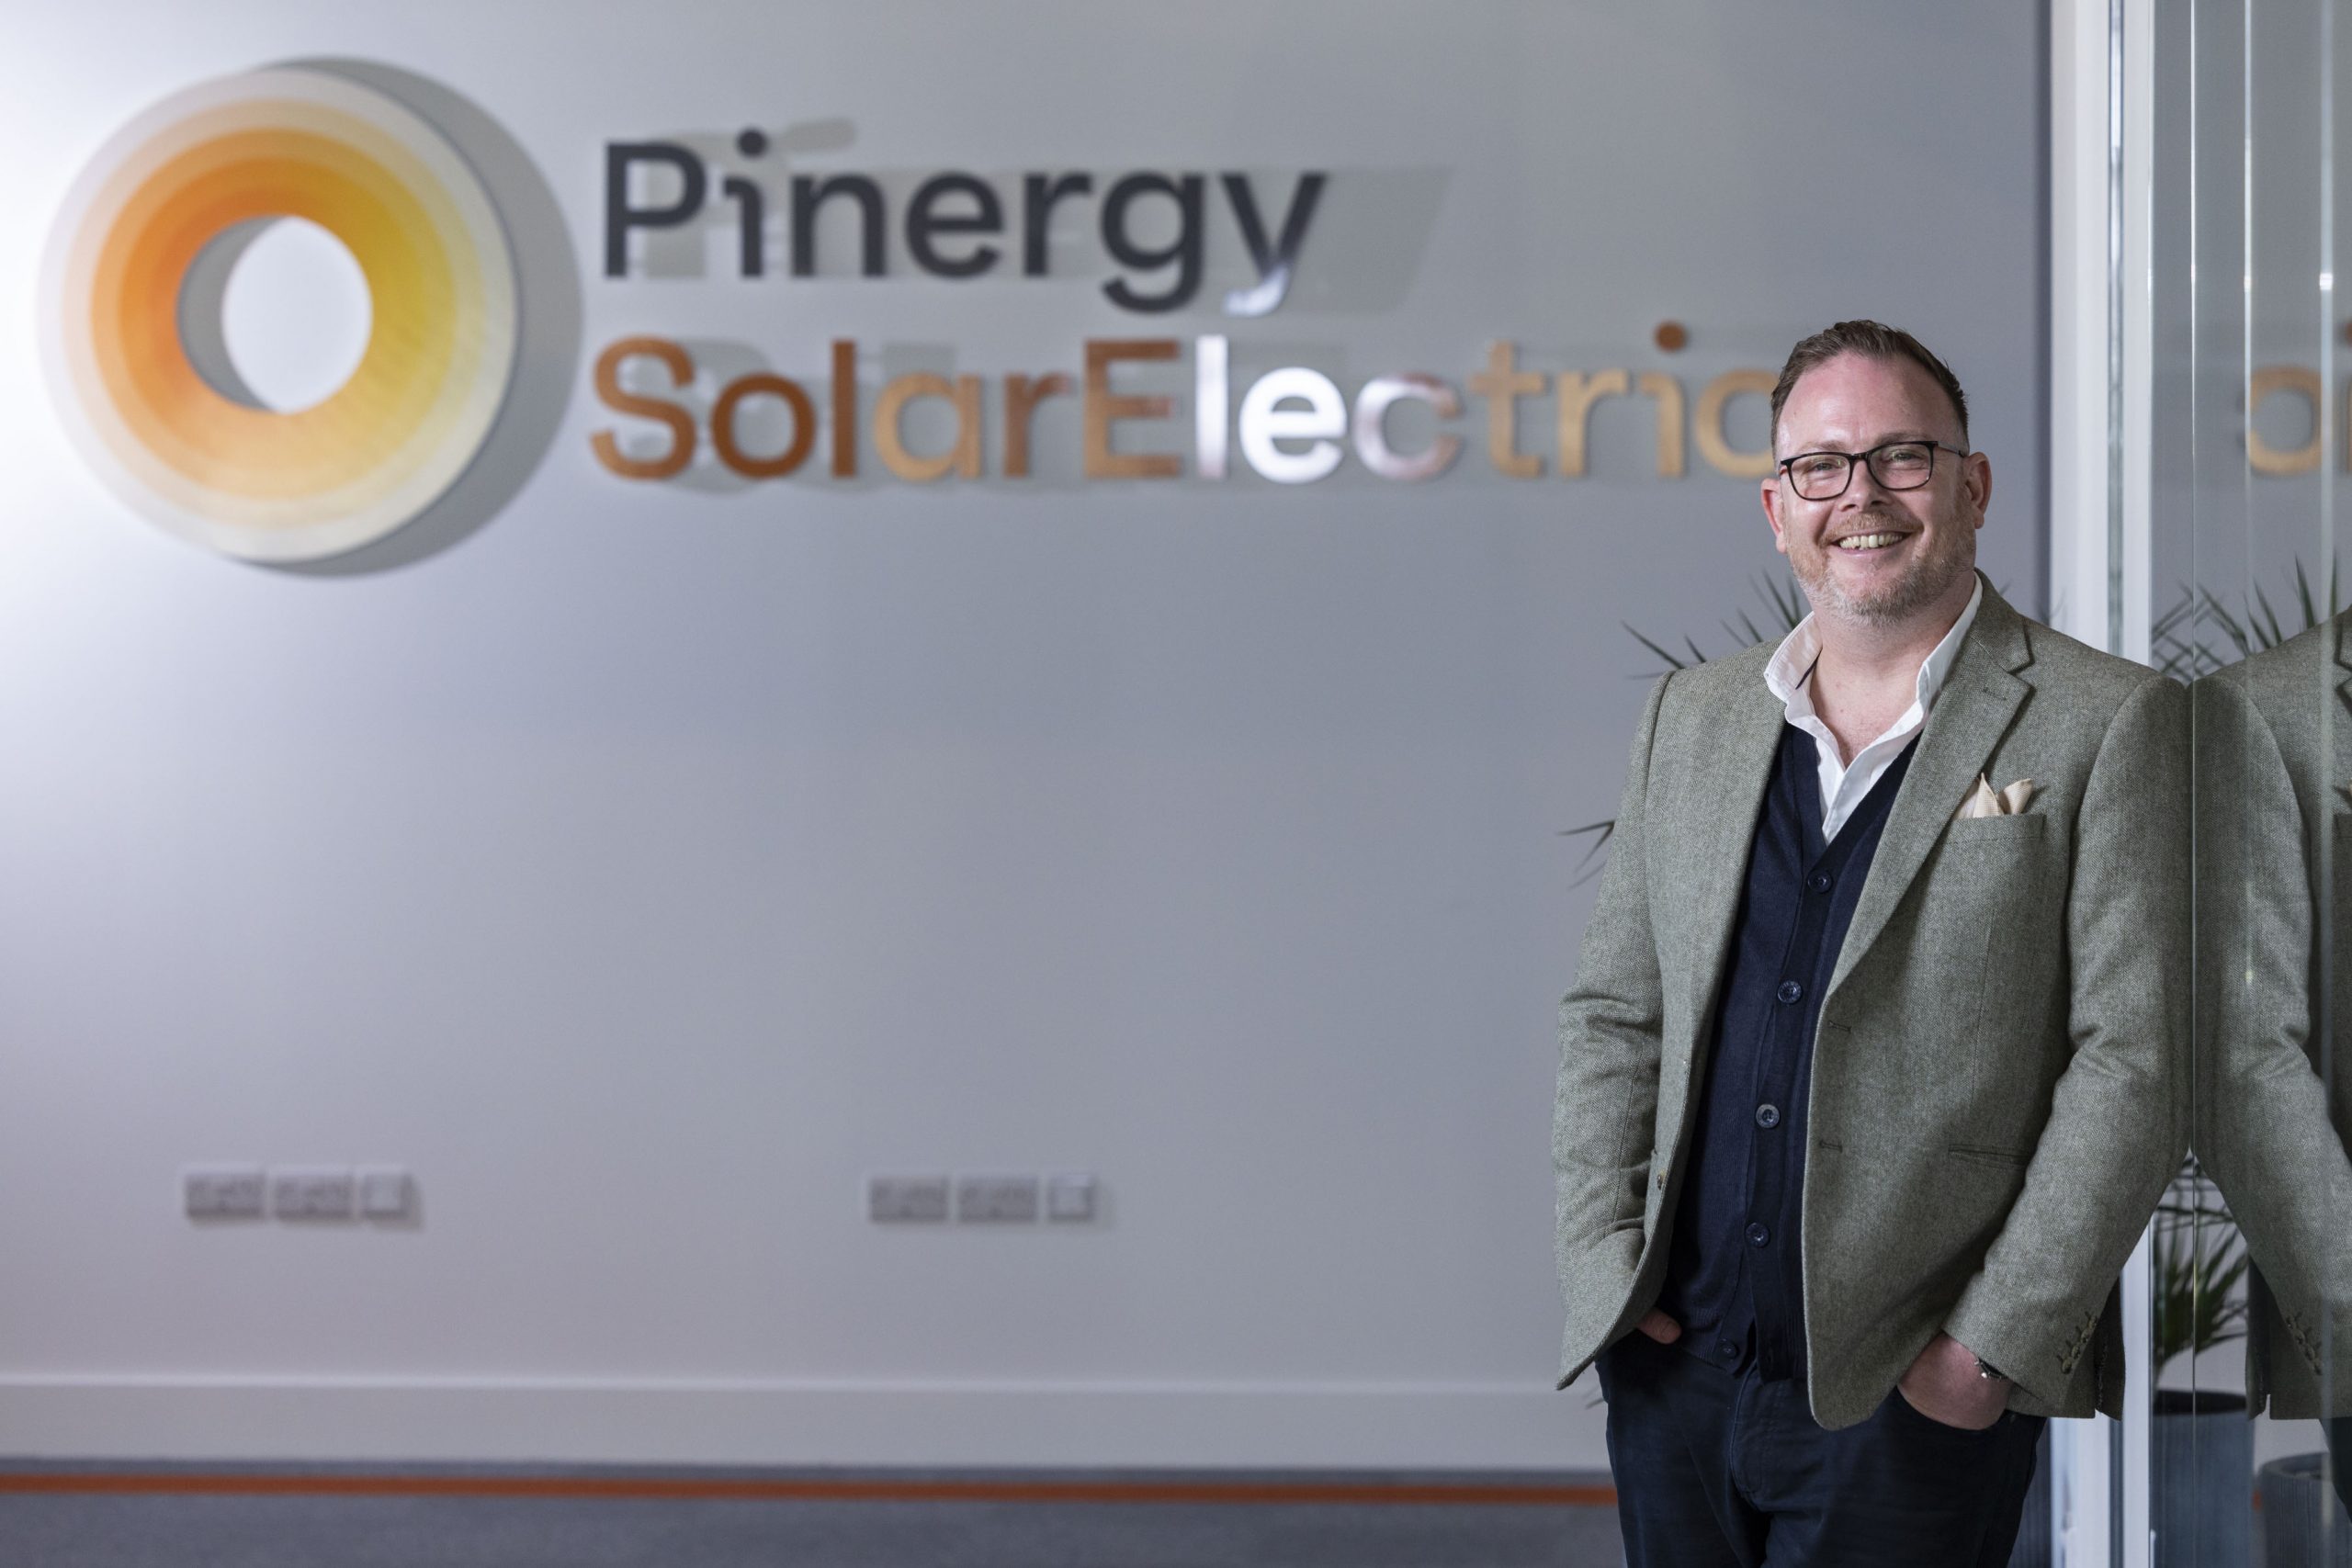 Pinergy SolarElectric appoints Ronan Power as Chief Executive Officer